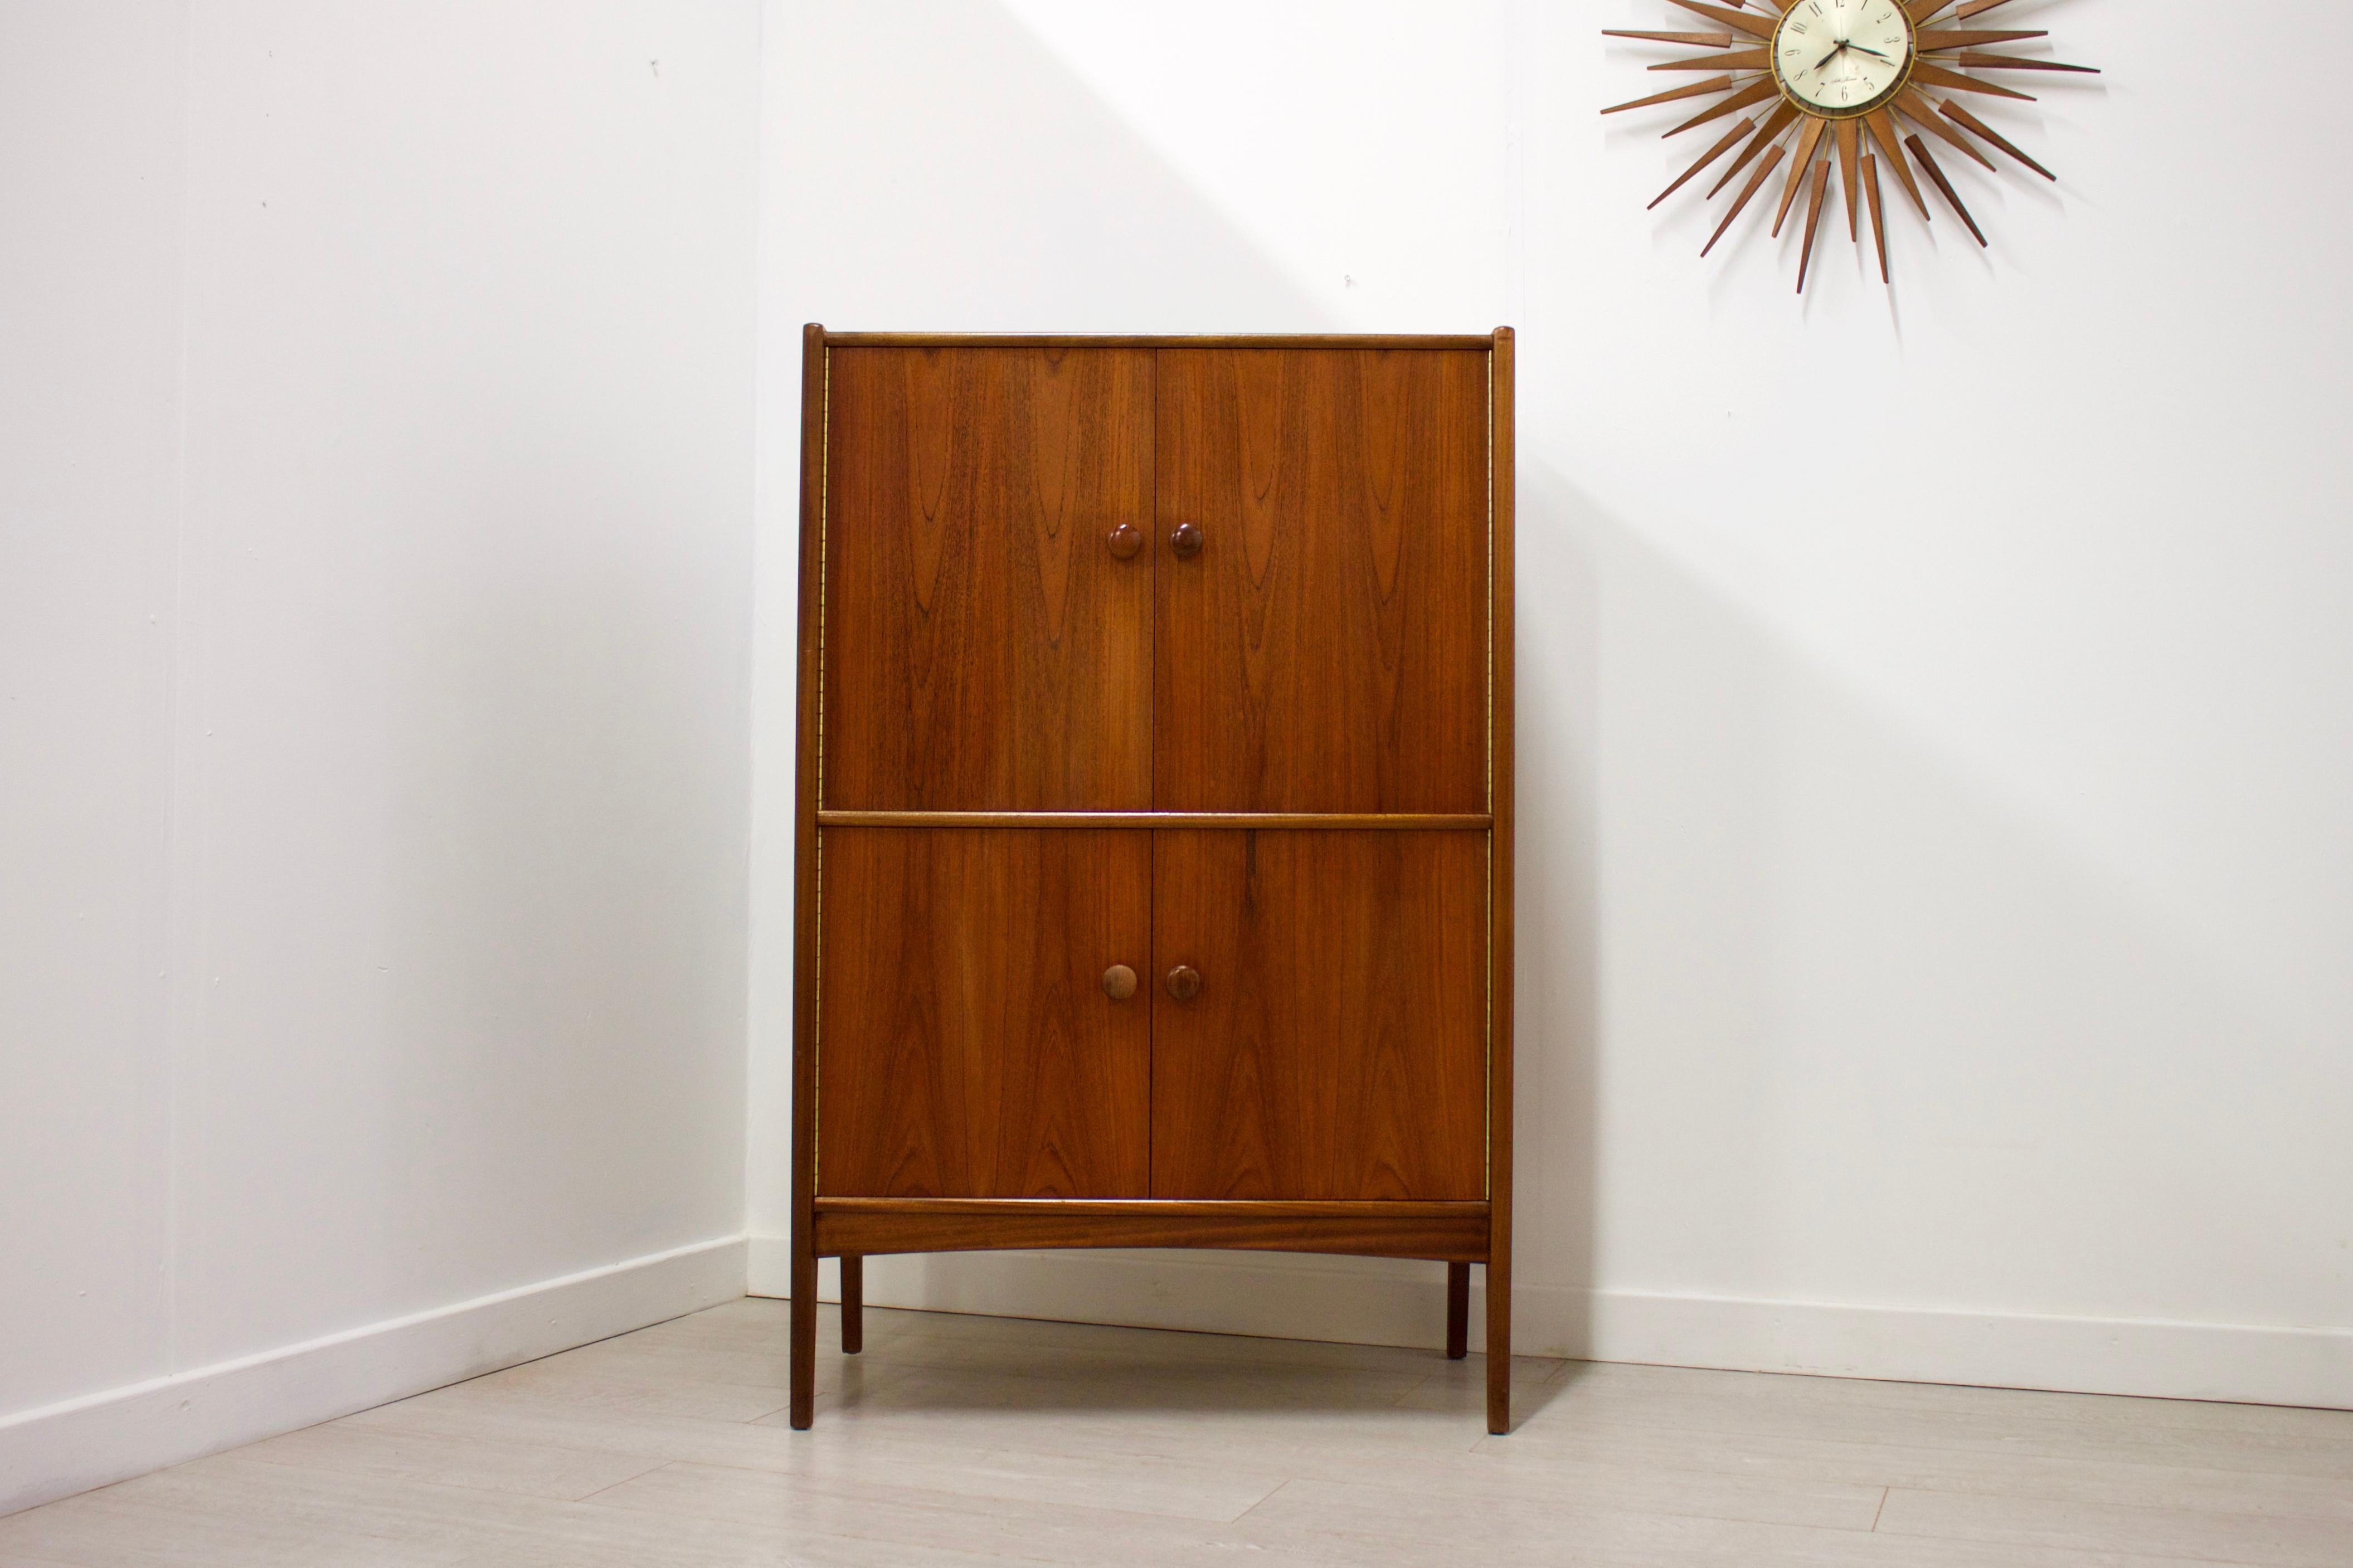 British Midcentury Teak Drinks Cabinet from Younger, 1960s For Sale